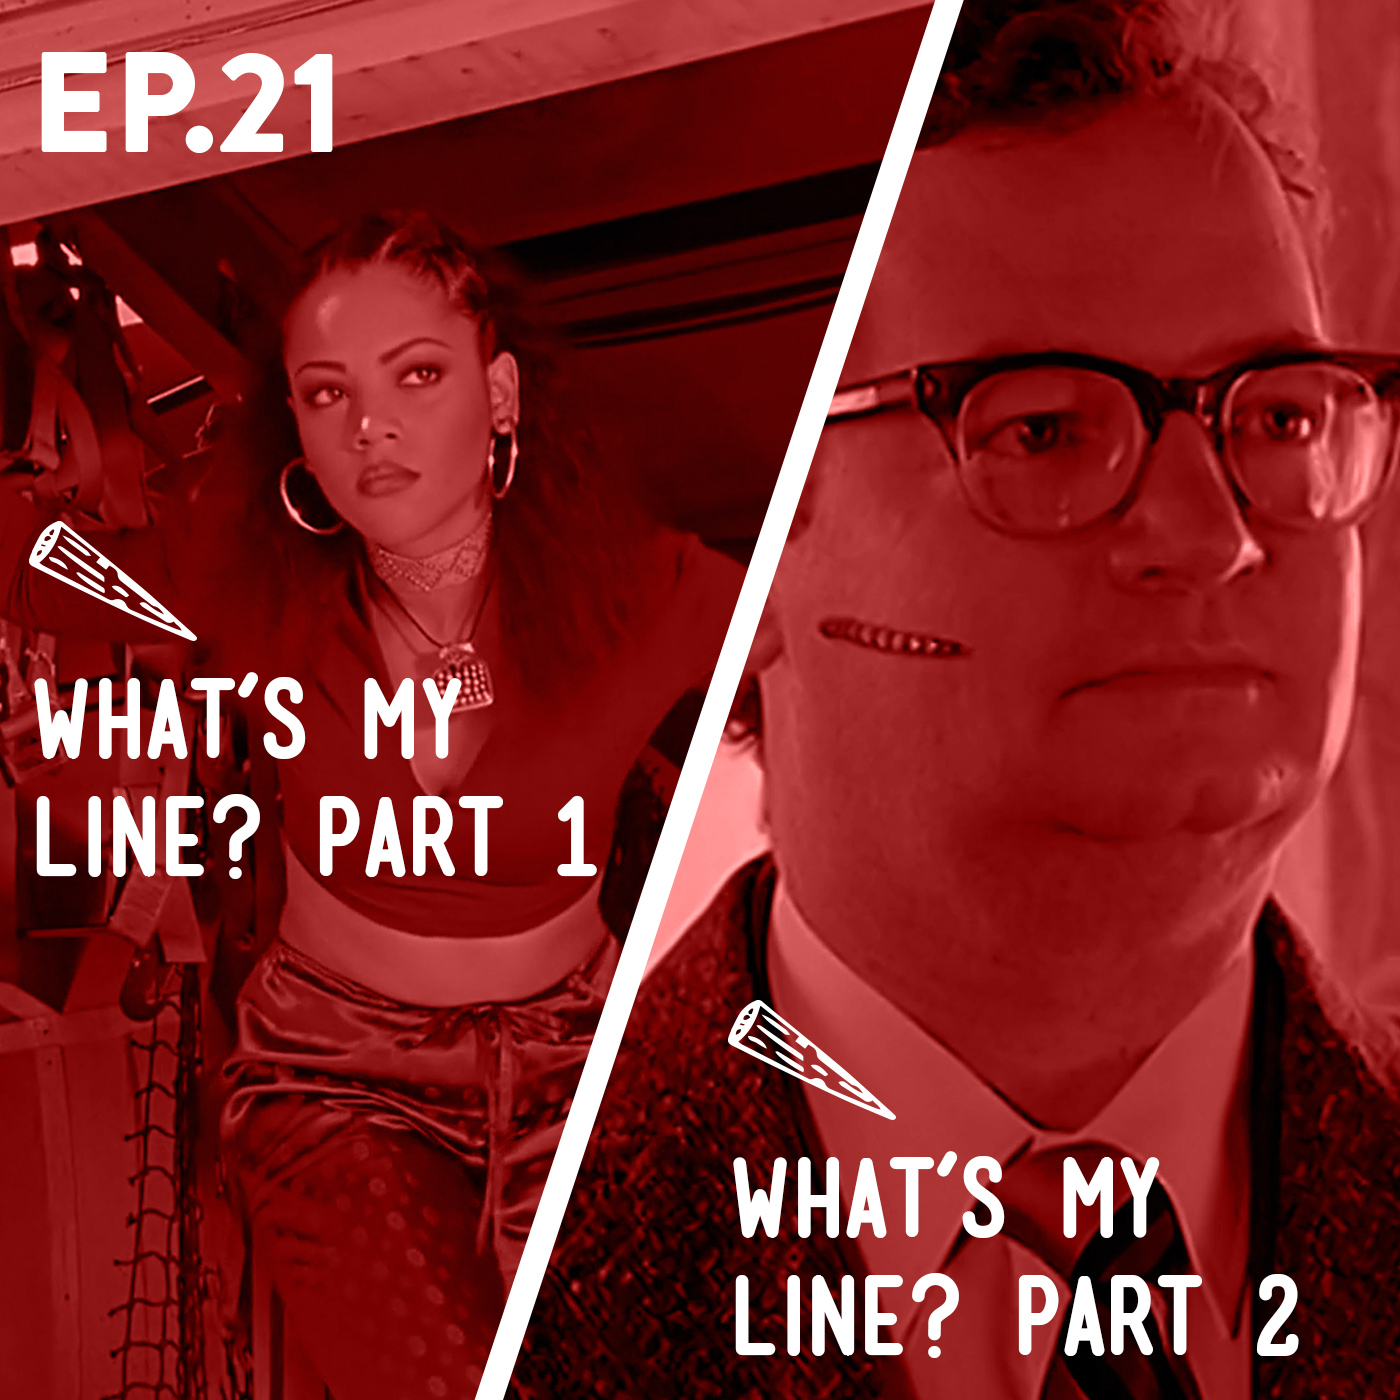 21 - What’s My Line? Parts 1 & 2 (Buffy only) Image